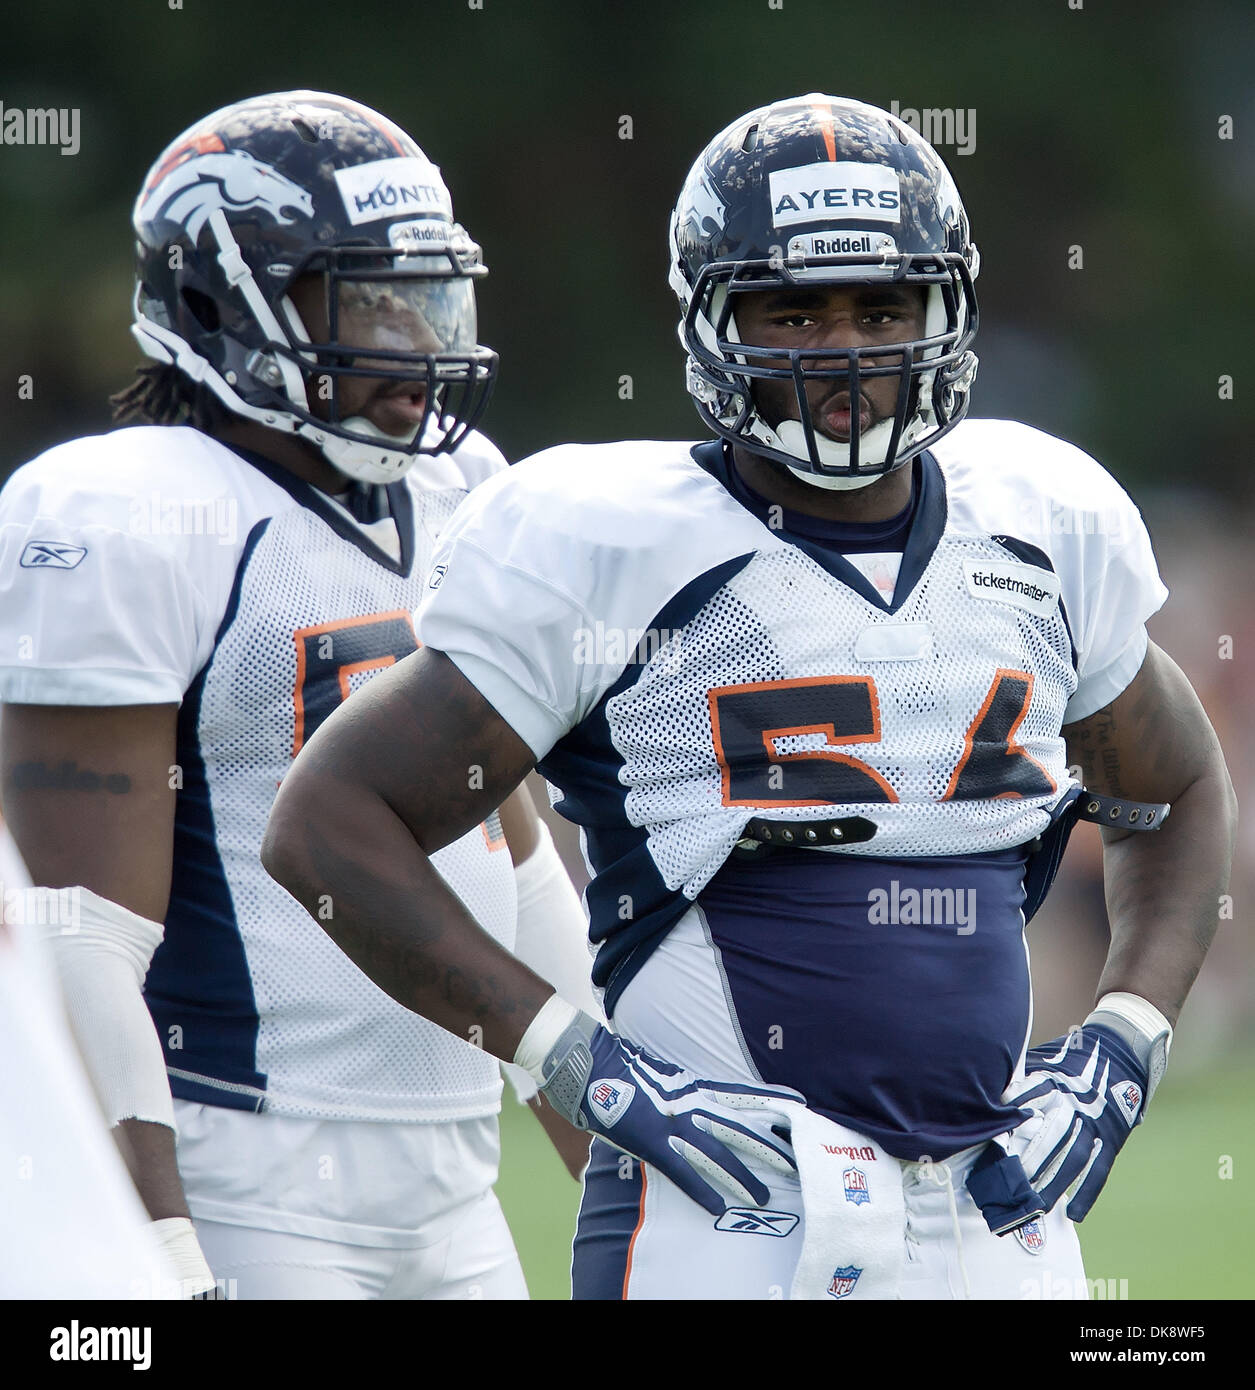 July 31, 2011 - Centennial, Colorado, U.S. - DE ROBERT AYERS, right, awaits instructions before the next defensive drills commence  during the Denver Broncos Training Camp Sunday afternoon at Dove Valley in Centennial, Colorado.  (Credit Image: © Hector Acevedo/ZUMAPRESS.com) Stock Photo